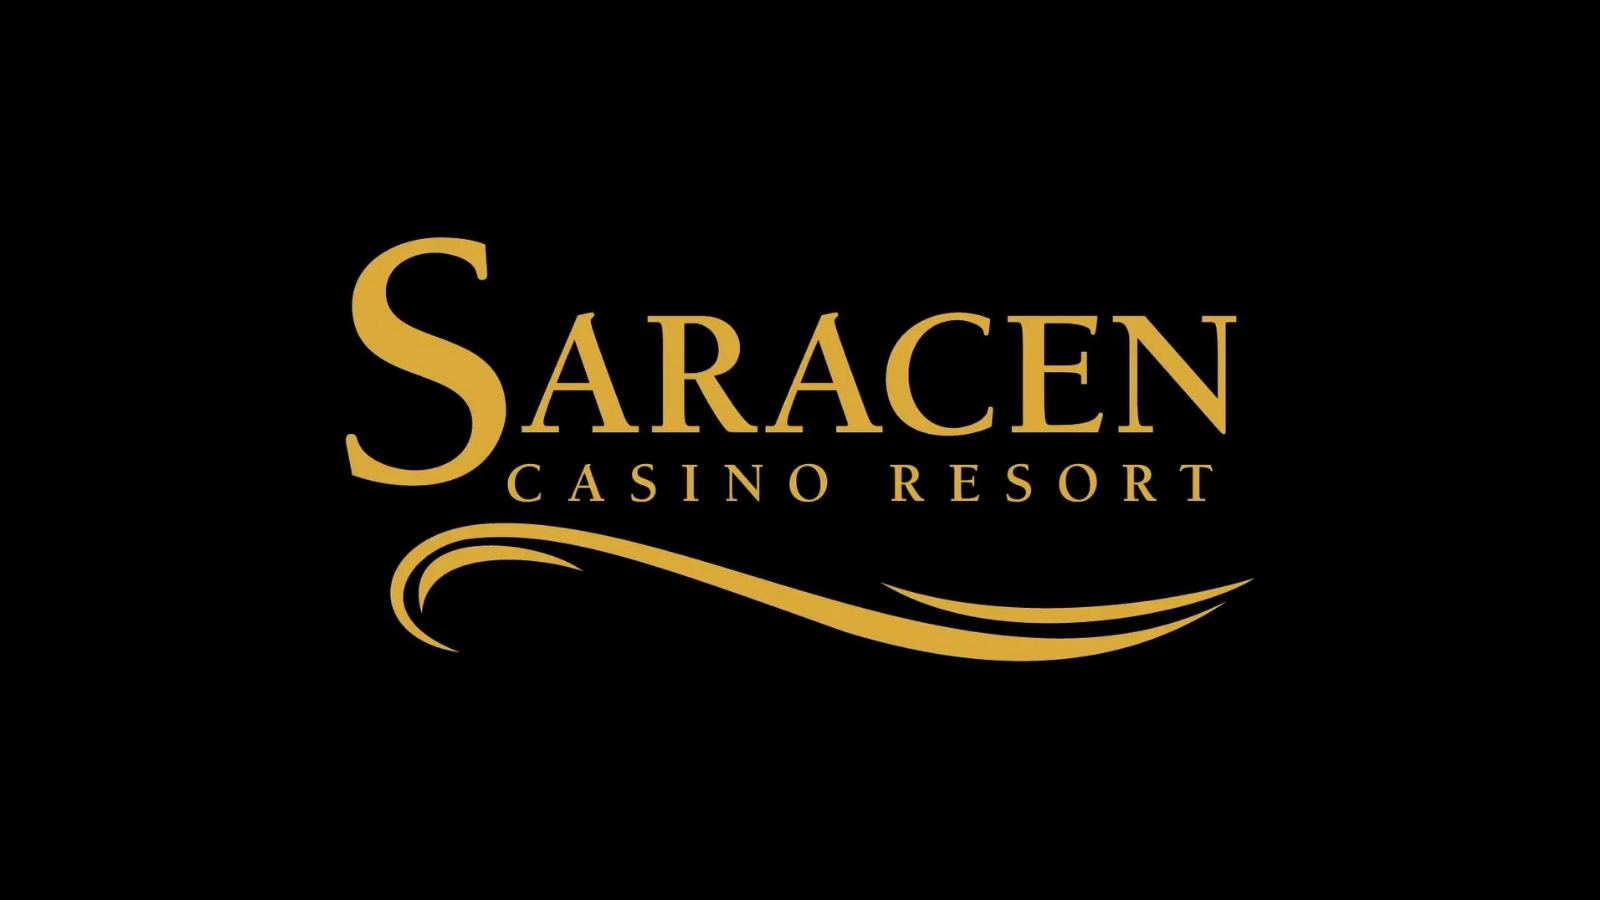 Saracen Casino Resort Selects Global Payments’ iGaming Solutions to Launch Arkansas’ First Sports Betting App